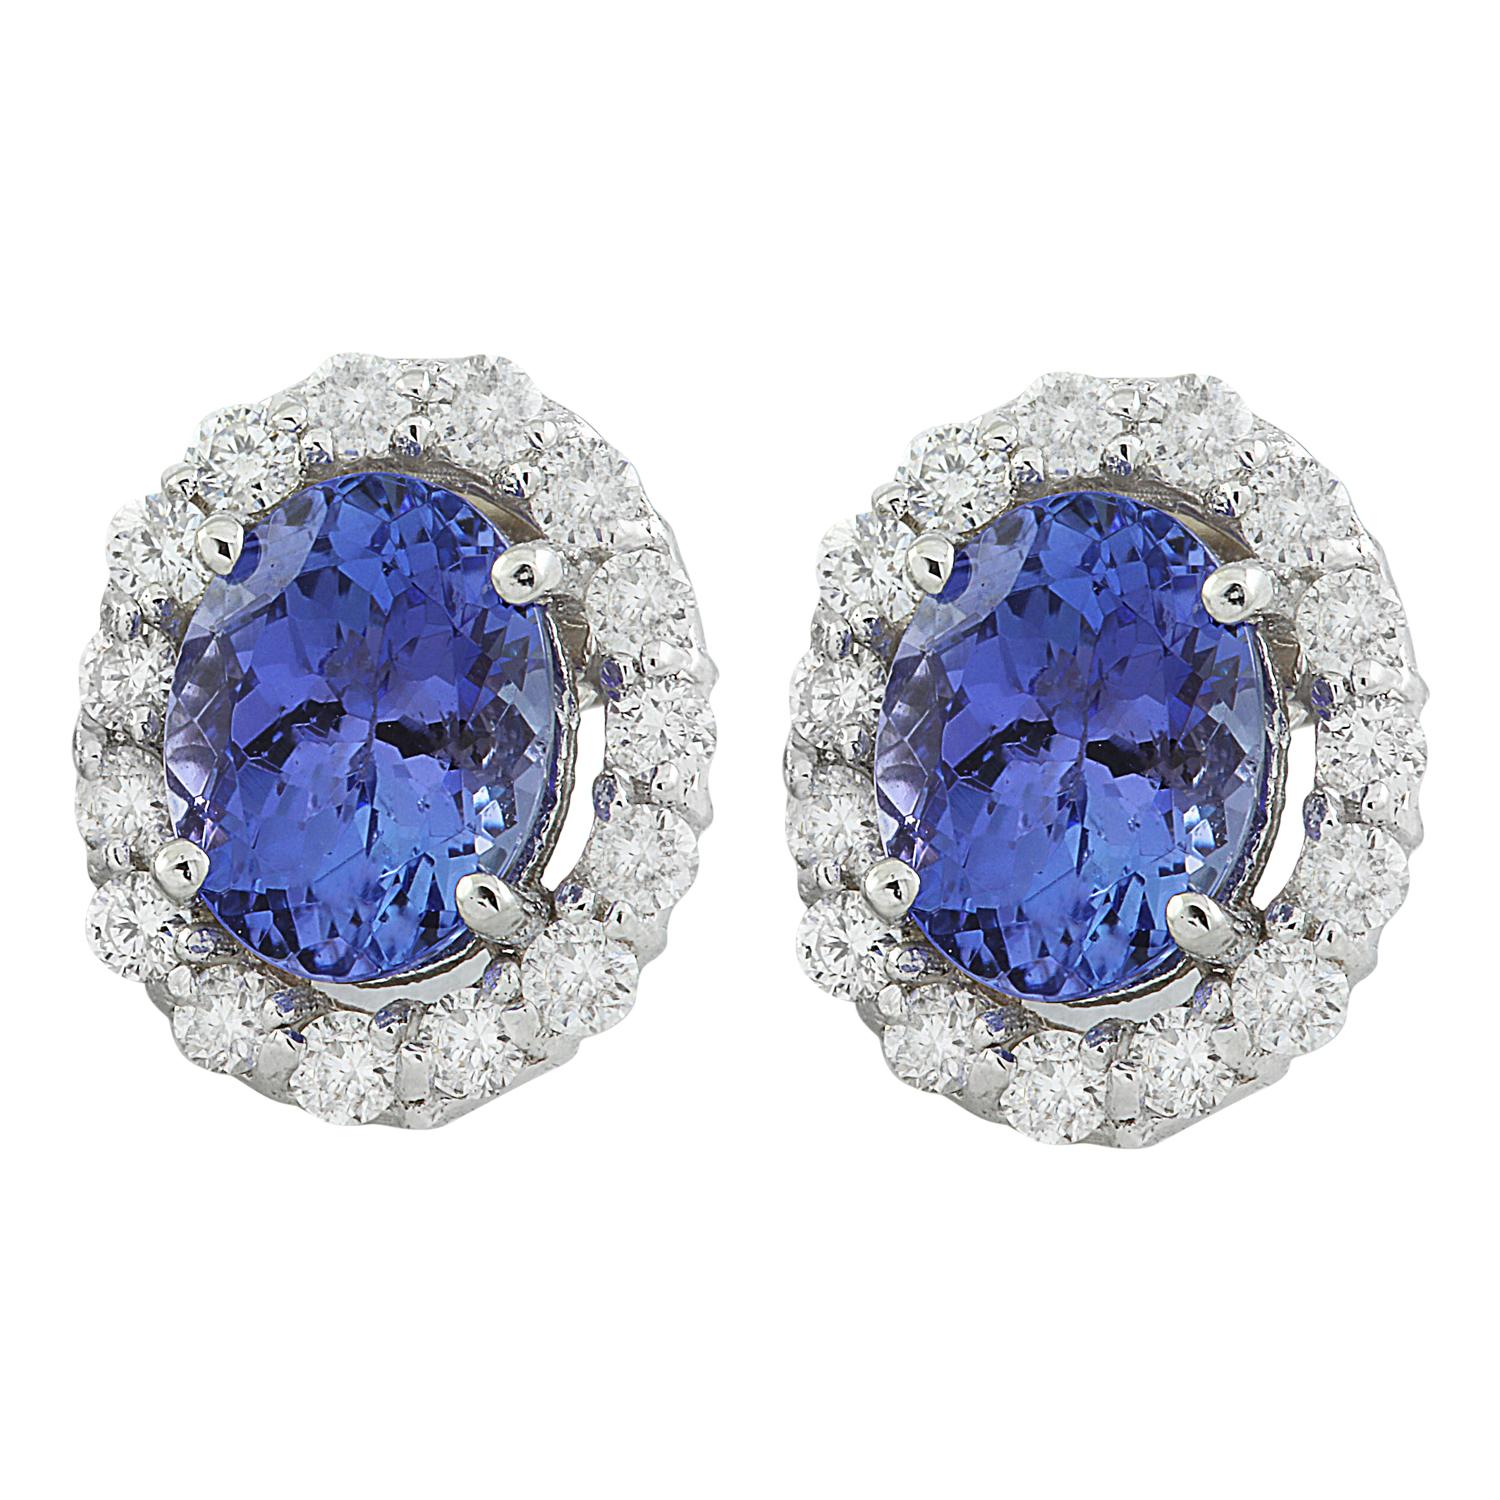 3.07 Carat Natural Tanzanite 14 Karat Solid White Gold Diamond Earrings 
Stamped: 14K 
Total Earrings Weight: 2.1 Grams 
Tanzanite Weight: 2.37 Carat (8.00x6.00 Millimeters)
Diamond Weight: 0.70 Carat (F-G Color, VS2-SI1 Clarity)
Face Measures: